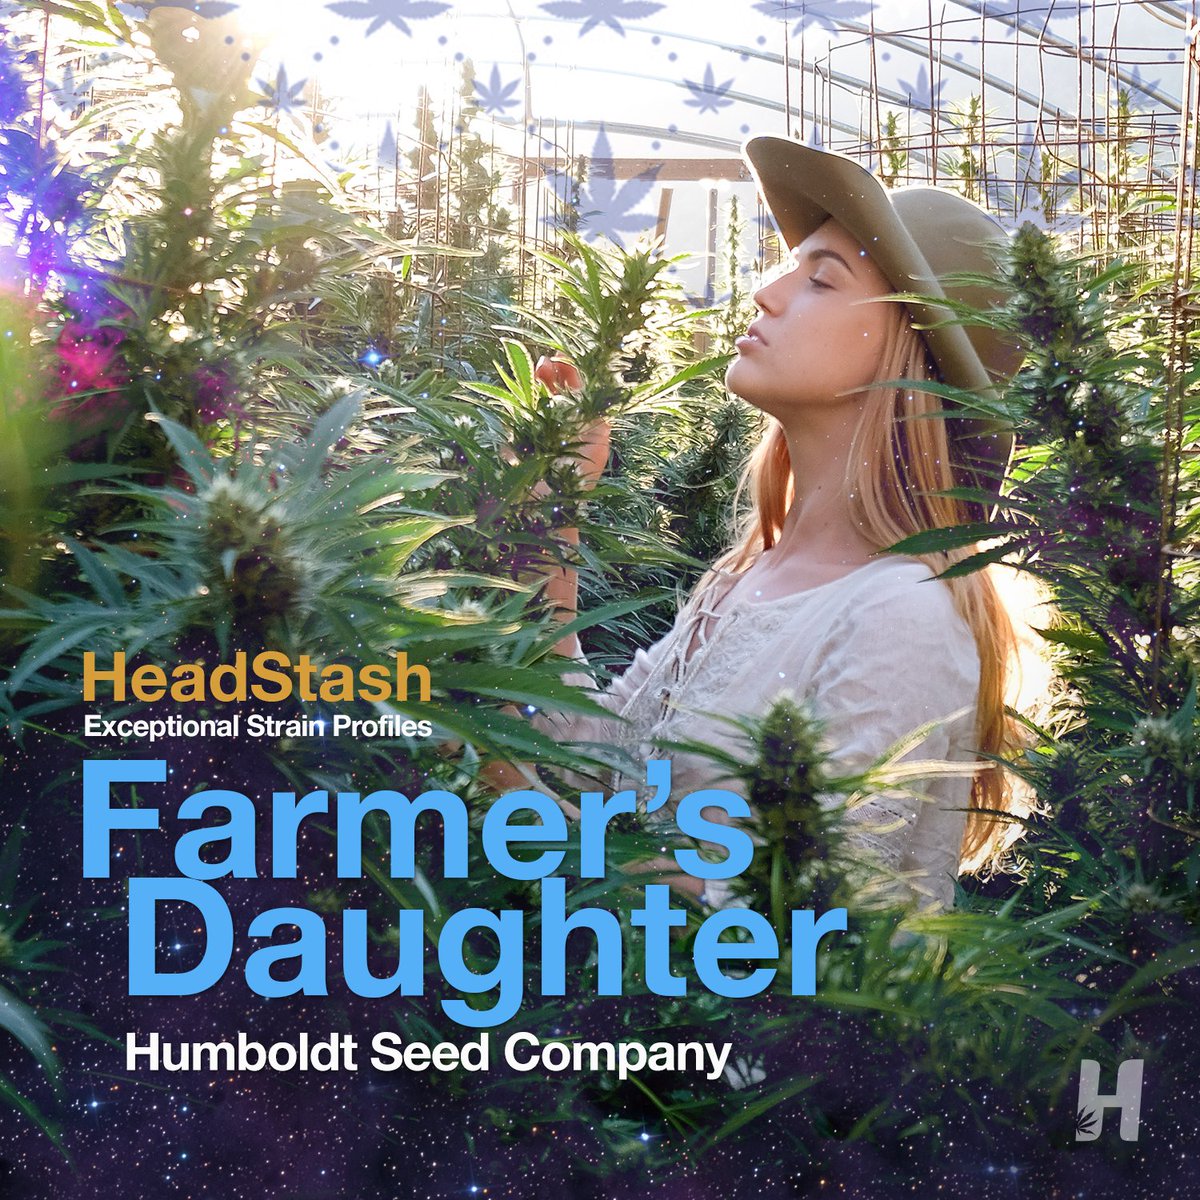 Reacquaint yourself with Farmer’s Daughter by Humboldt Seed Company, our most popular HeadStash strain to date.
headslifestyle.com/blogs/headstas…
#farmersdaughter #farmersdaughterstrain #growyourown #cannabis #stash #plants #terpenes #humboltseedcompany #natpennington #breeders